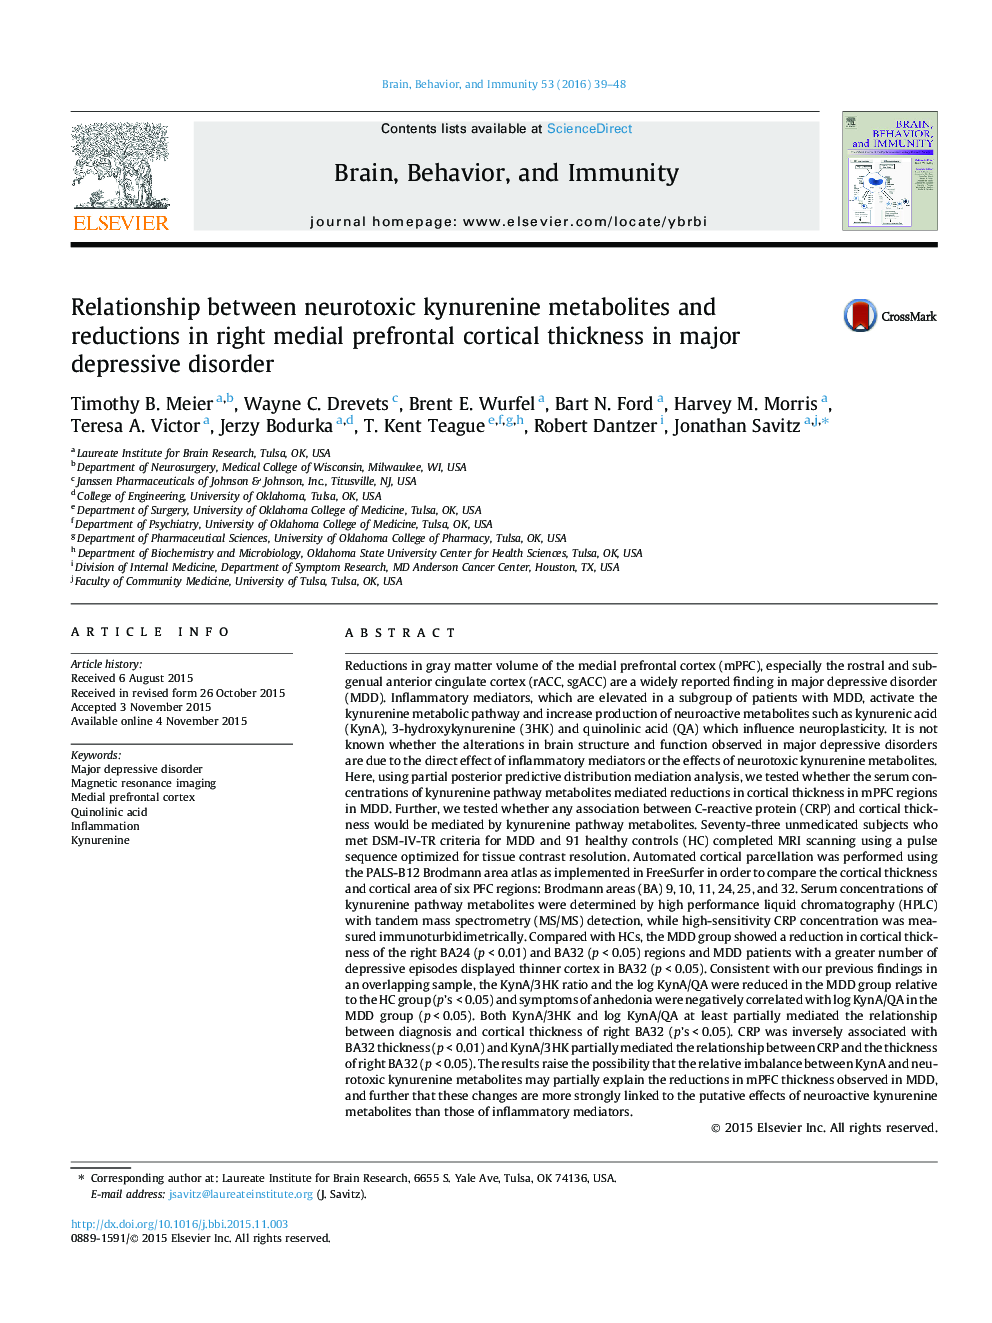 Relationship between neurotoxic kynurenine metabolites and reductions in right medial prefrontal cortical thickness in major depressive disorder